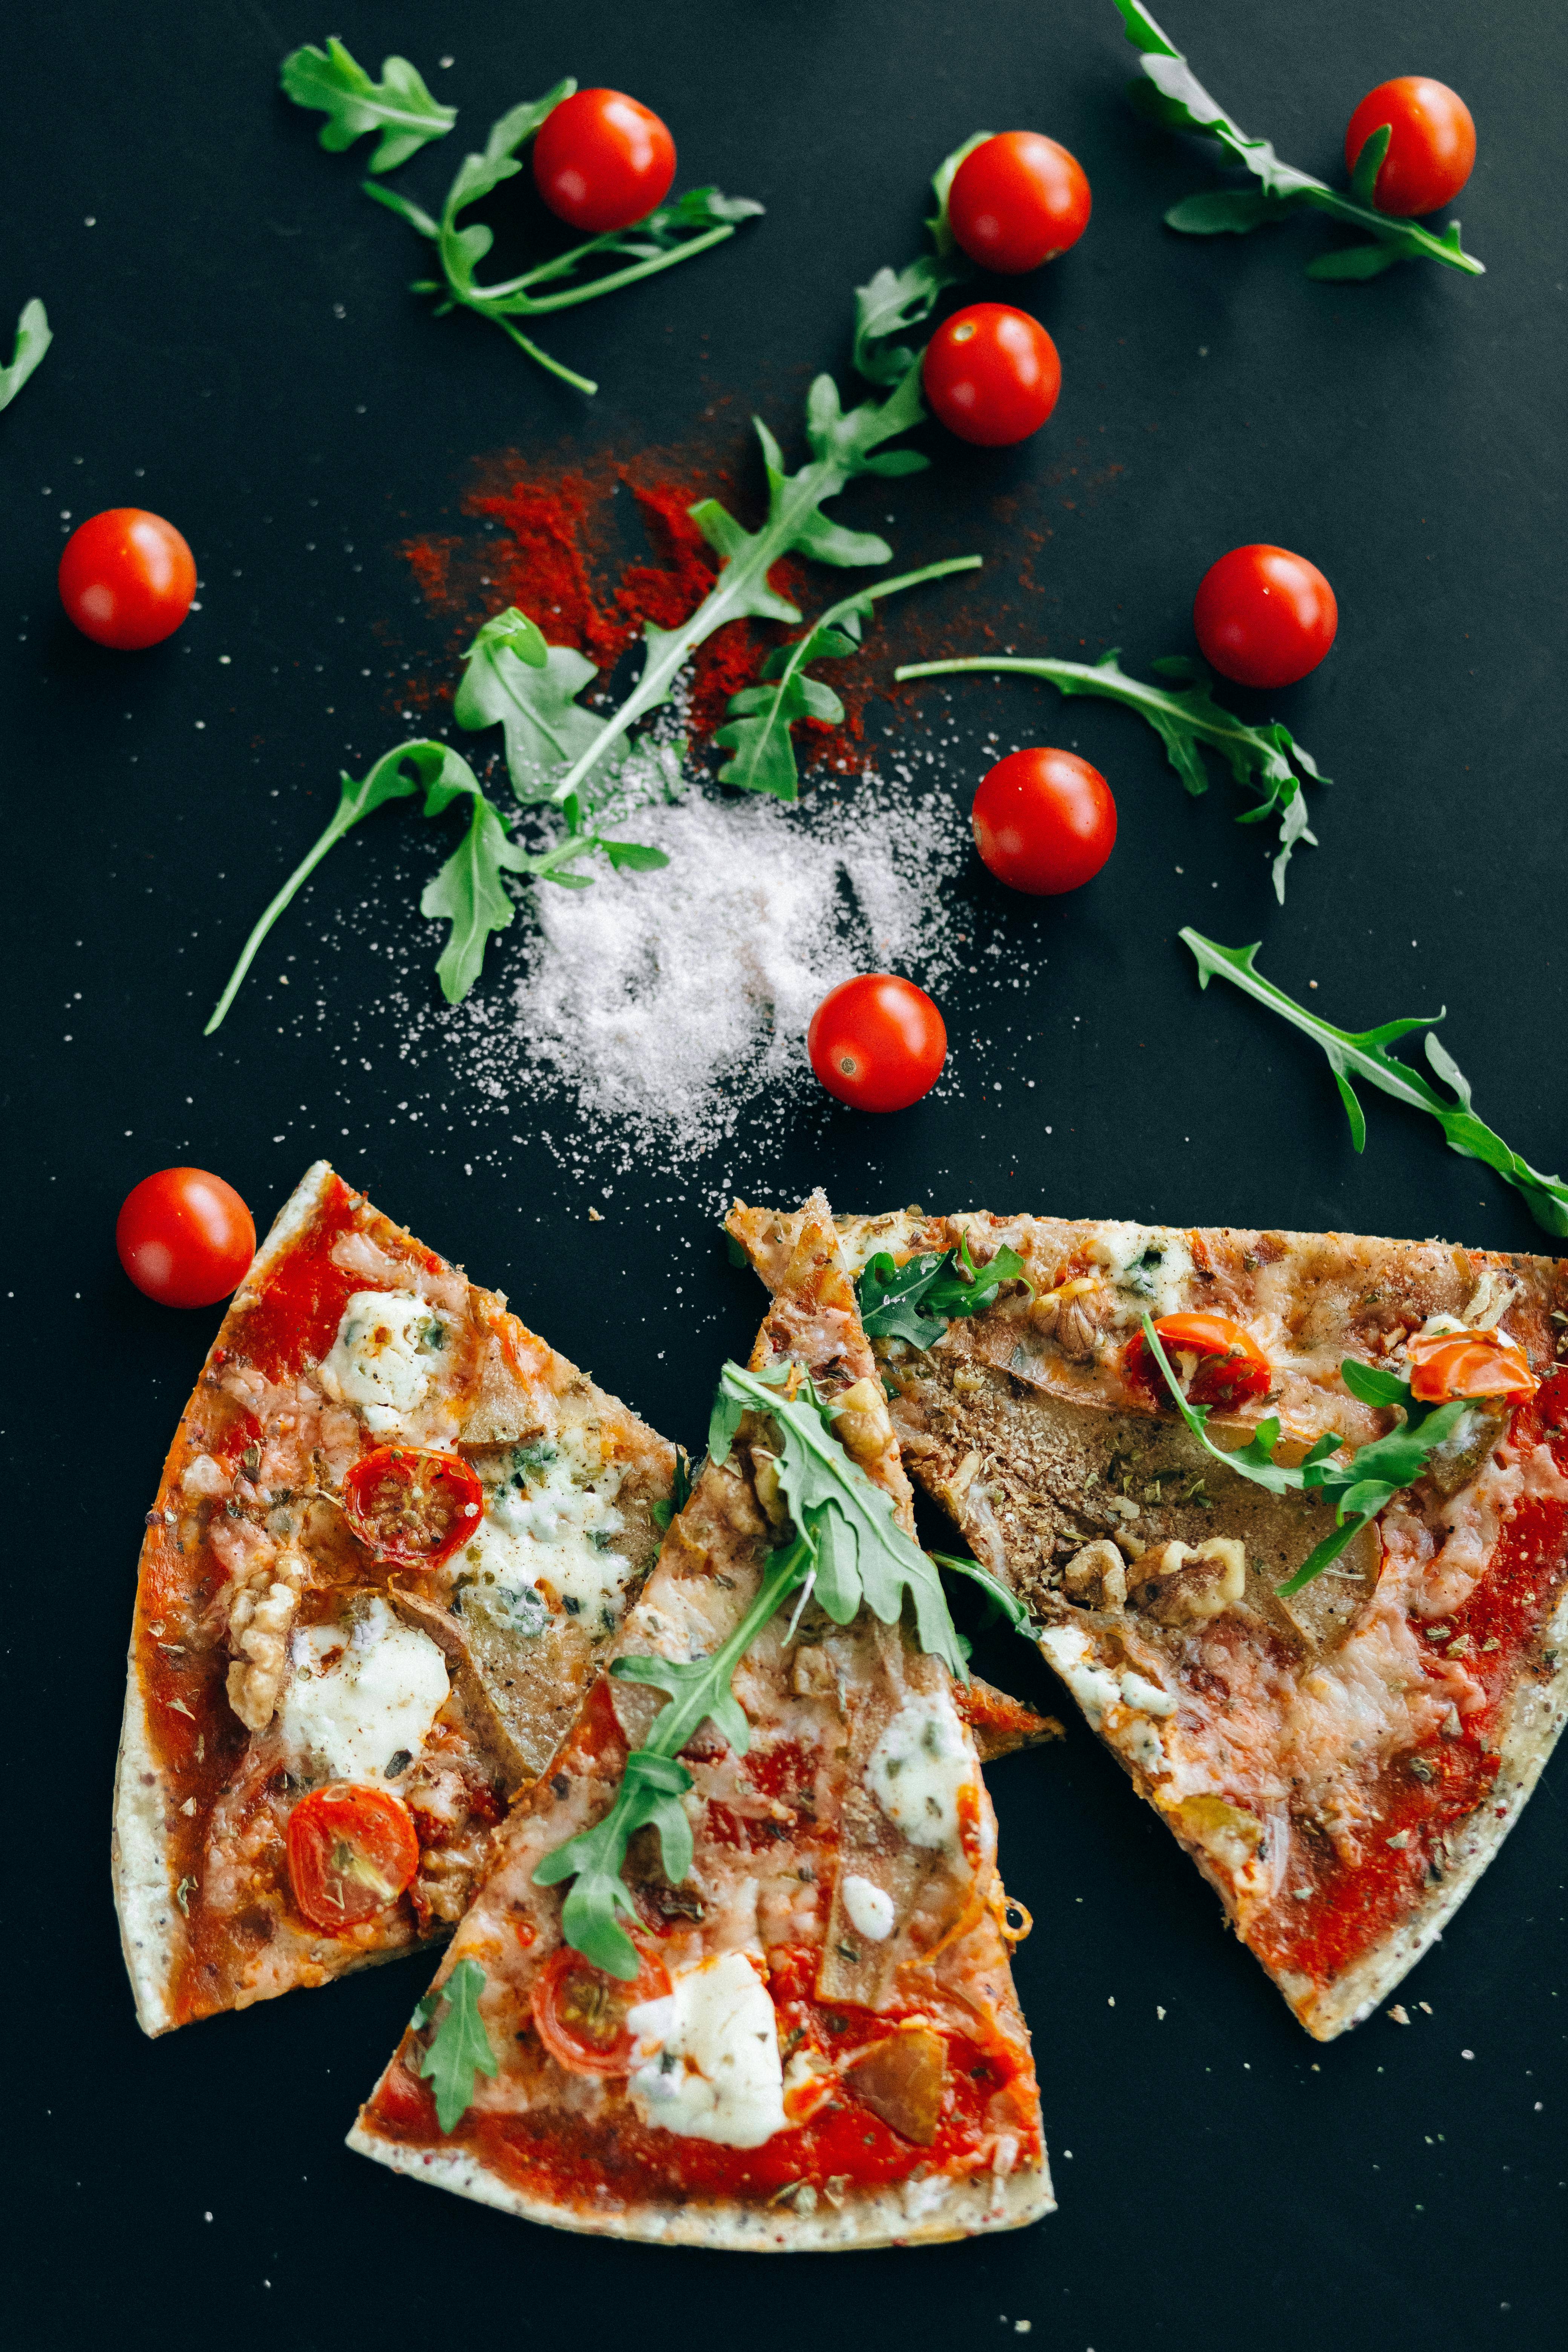 Pizzeria Photos, Download The BEST Free Pizzeria Stock Photos & HD Images